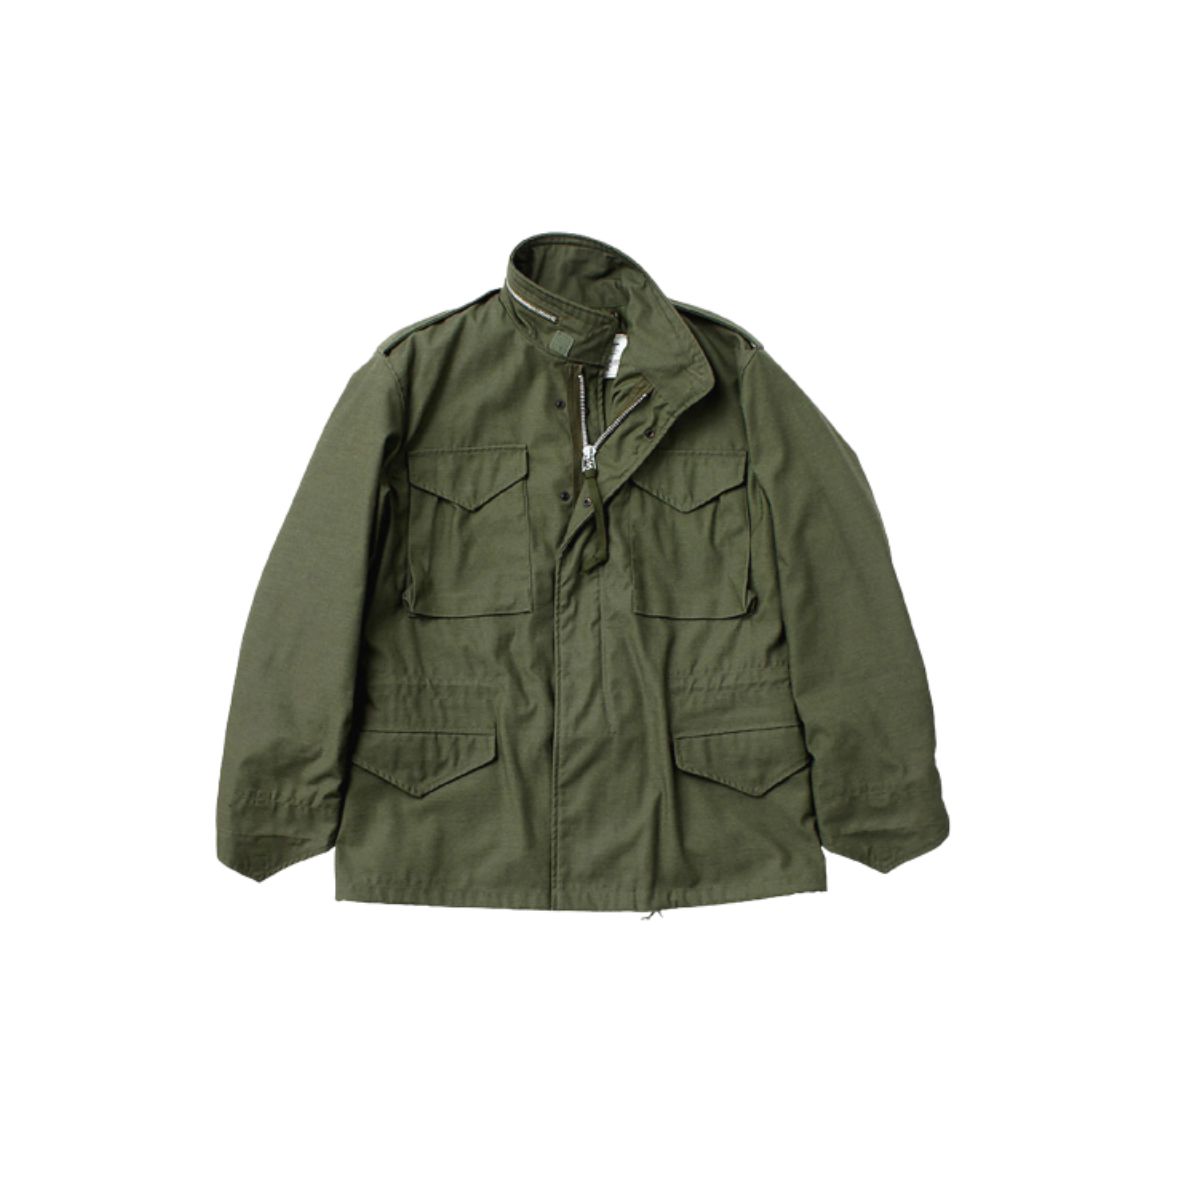 M65 Military Jacket with Removable Quilted Inner Liner - Olive